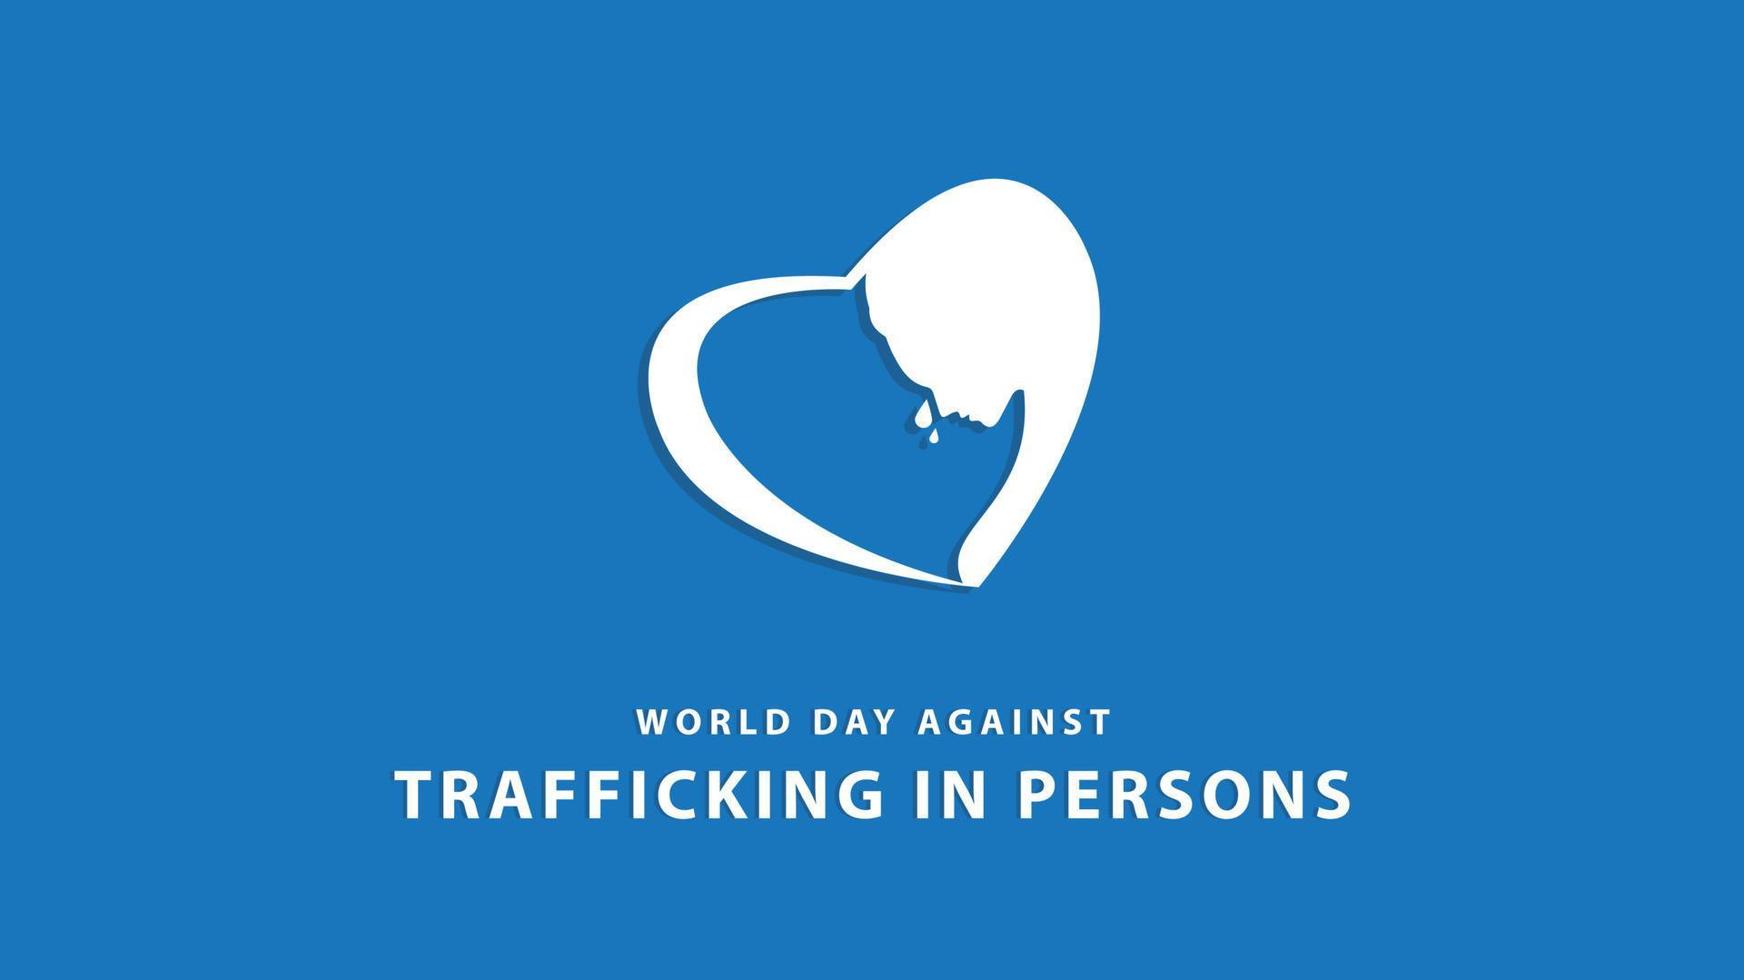 World Day against Trafficking in Persons. Vector illustration.